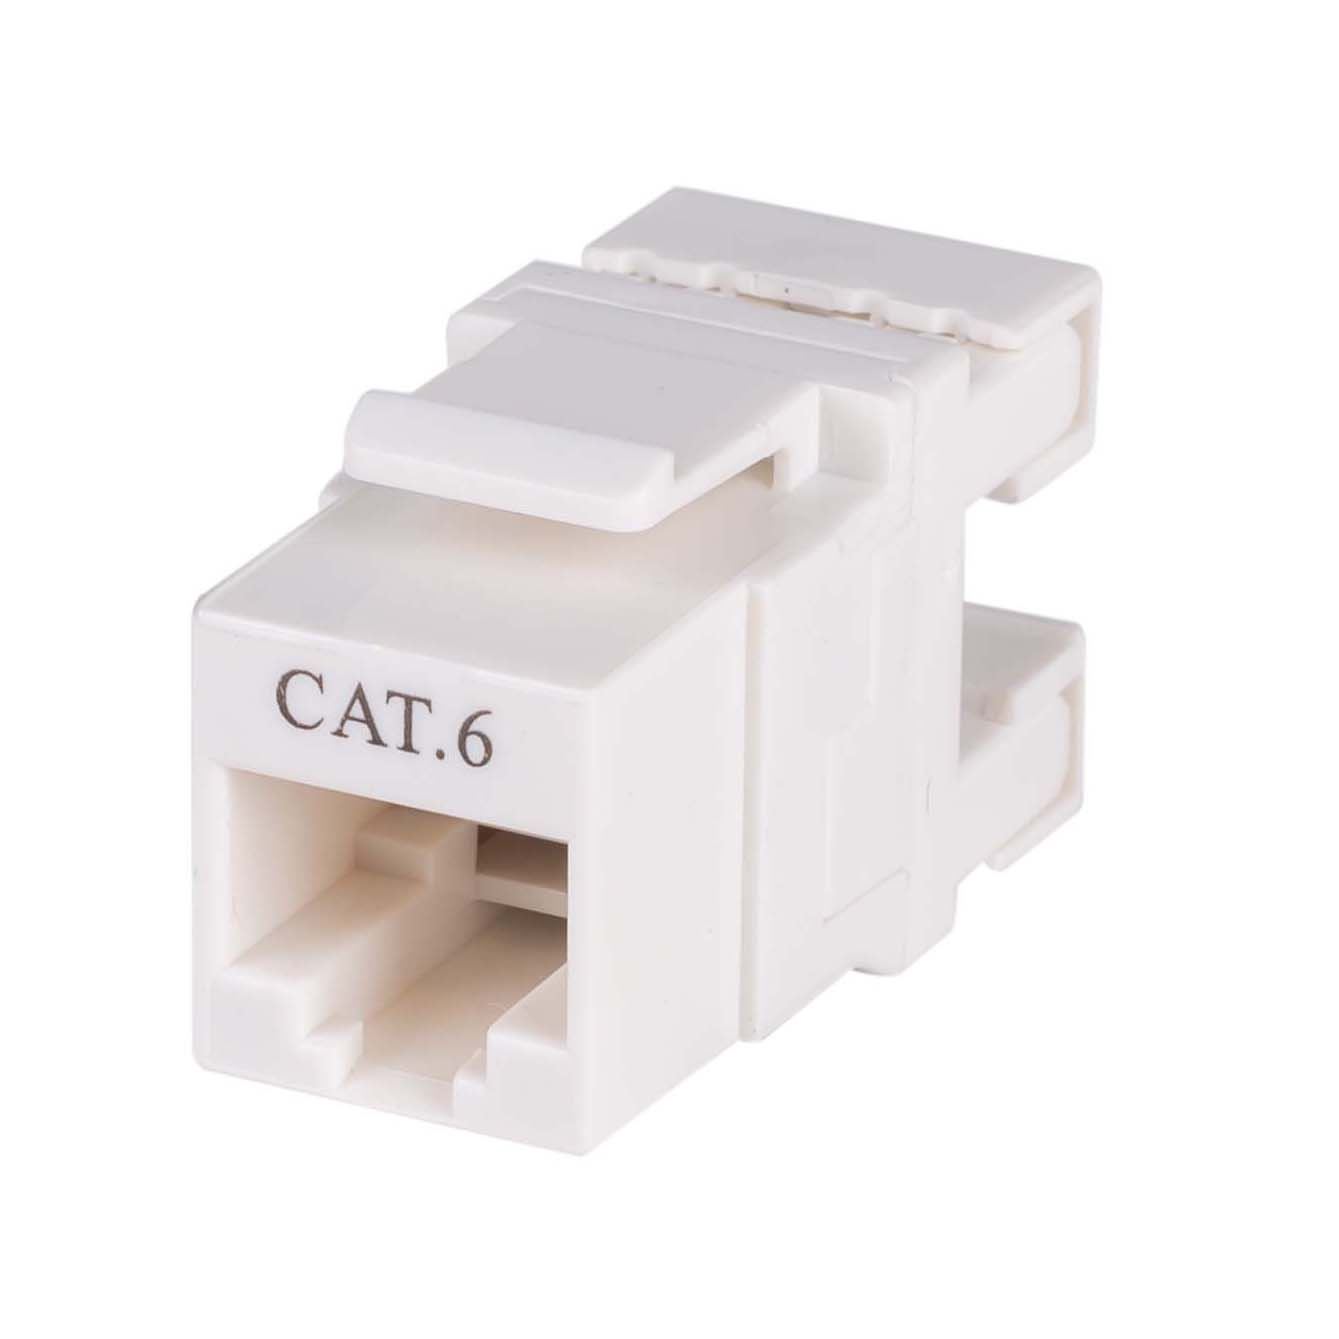 Cat6 Keystone RJ45 Jack For 110 Face Plate. T568A/T568B Wiring. 180 Jack.